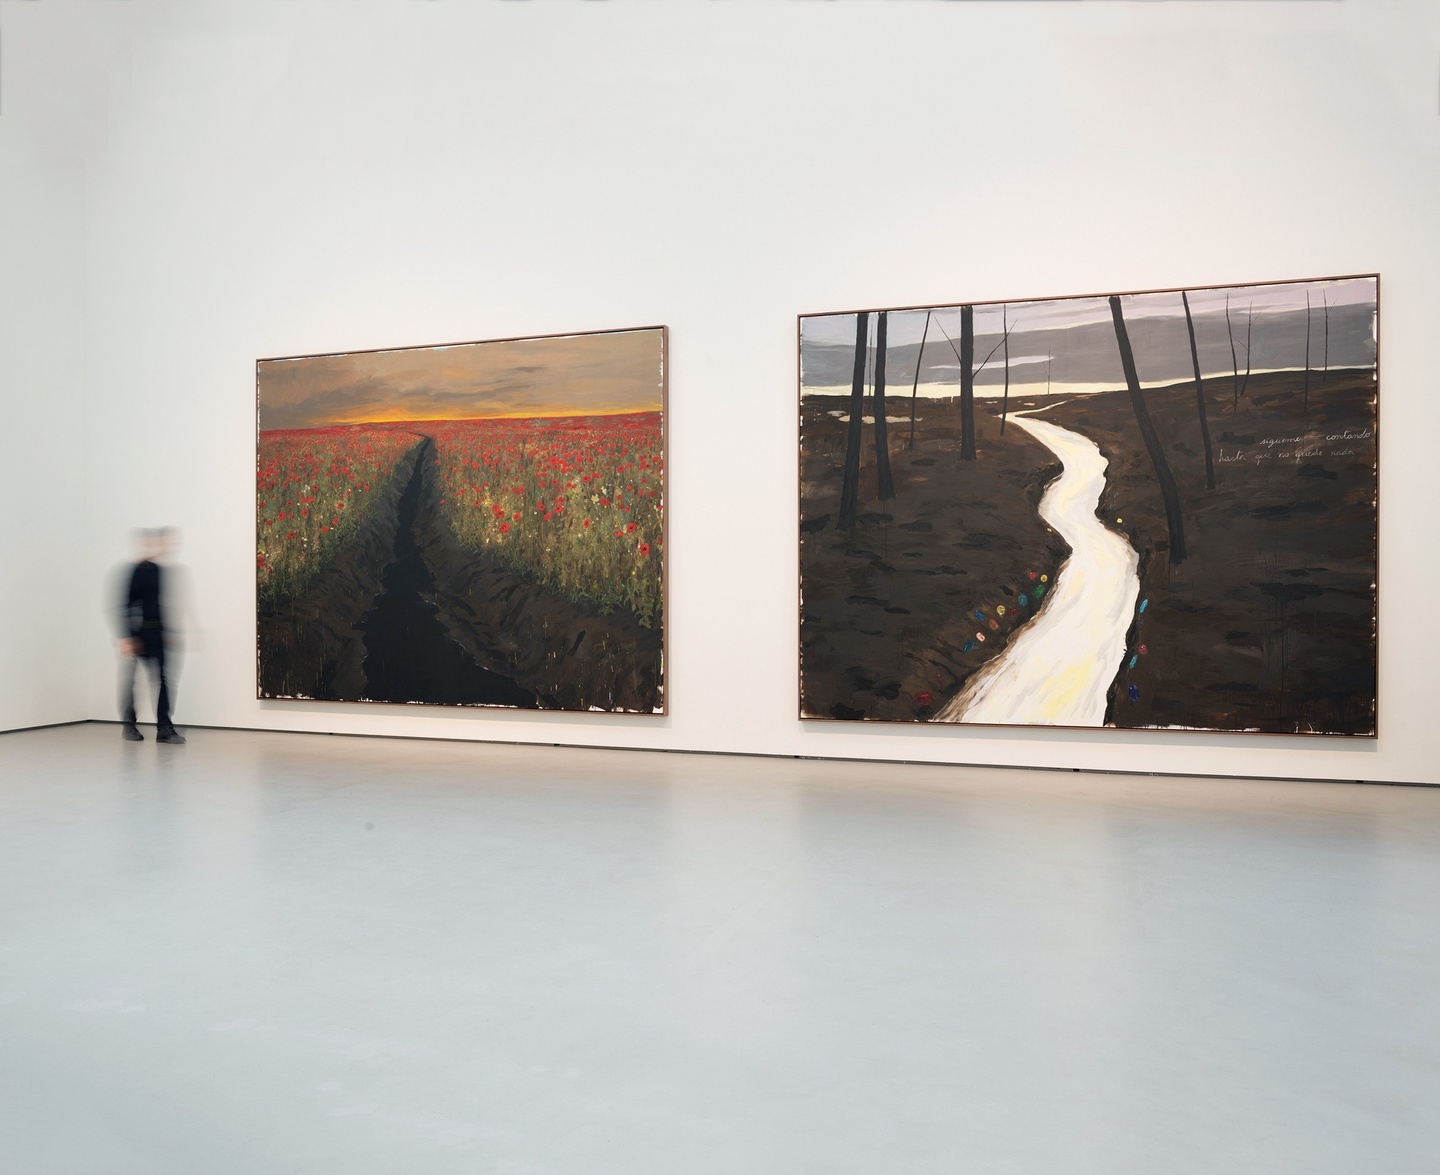 Gallery view of two landscape paintings. On the left is a vast field with red flowers and on the right is a barren swamp